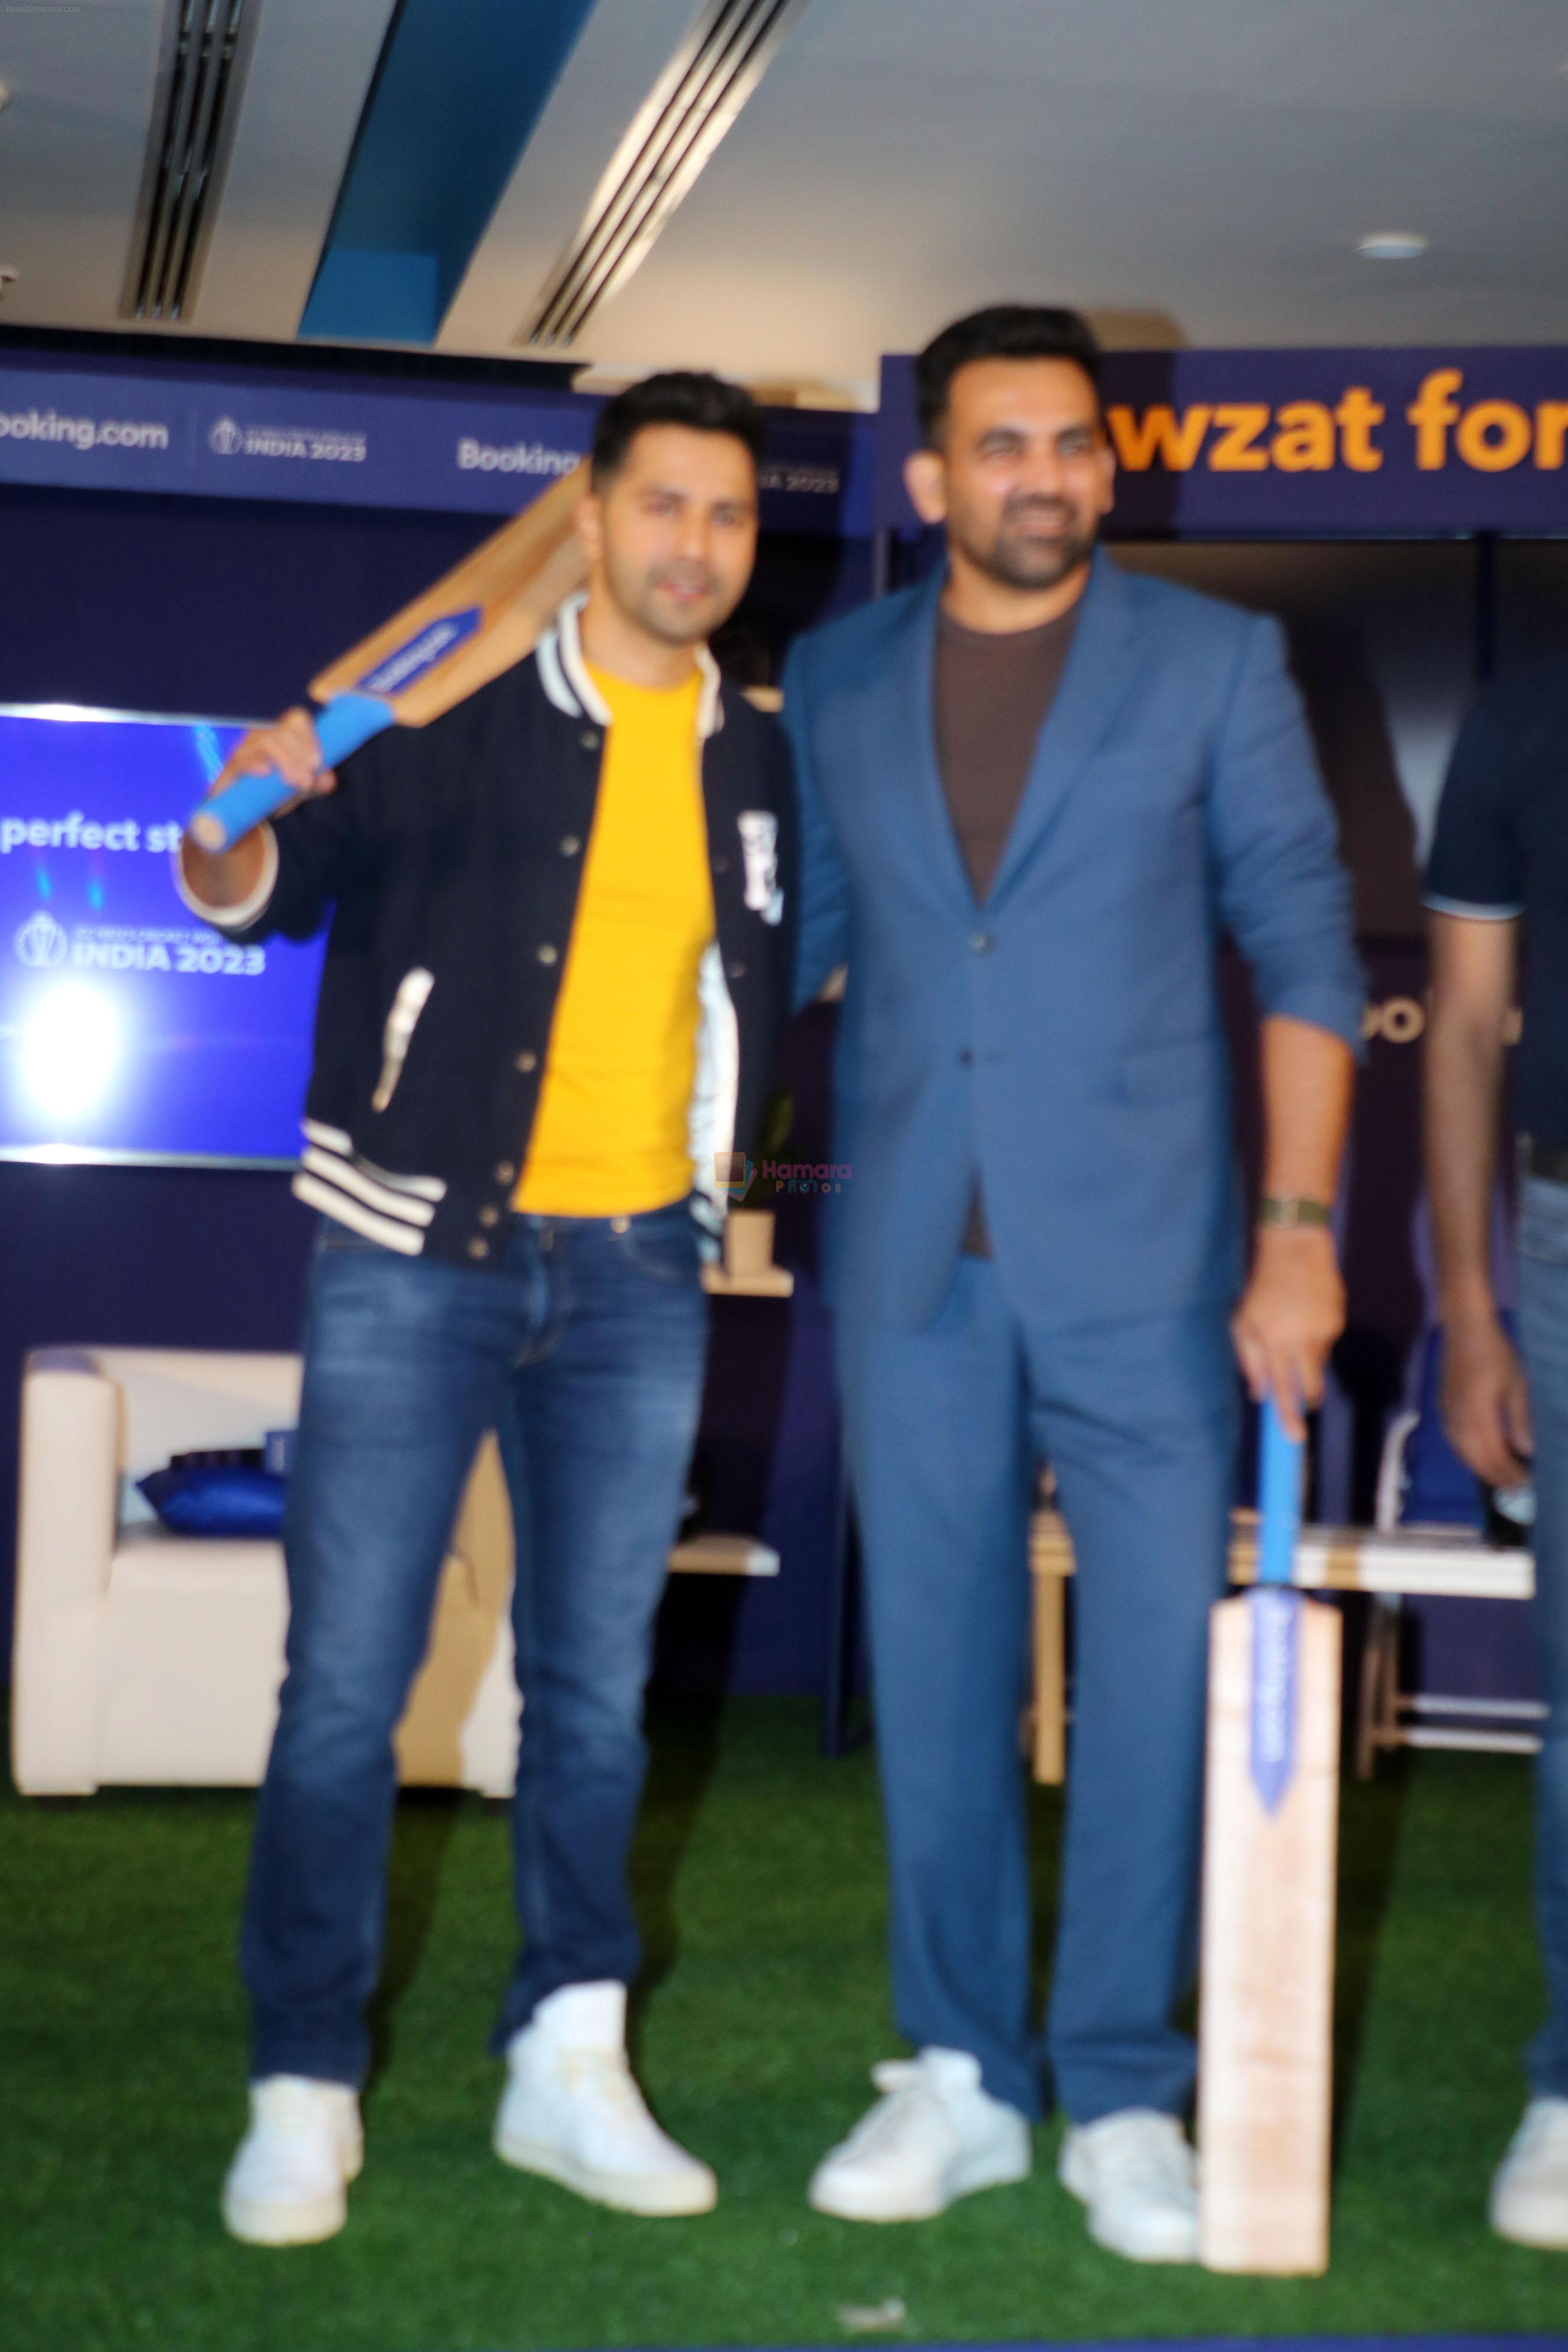 Varun Dhawan, Zaheer Khan at booking.com being official accomodation partner for the ICC Men World Cup 2023 on 3rd Oct 2023